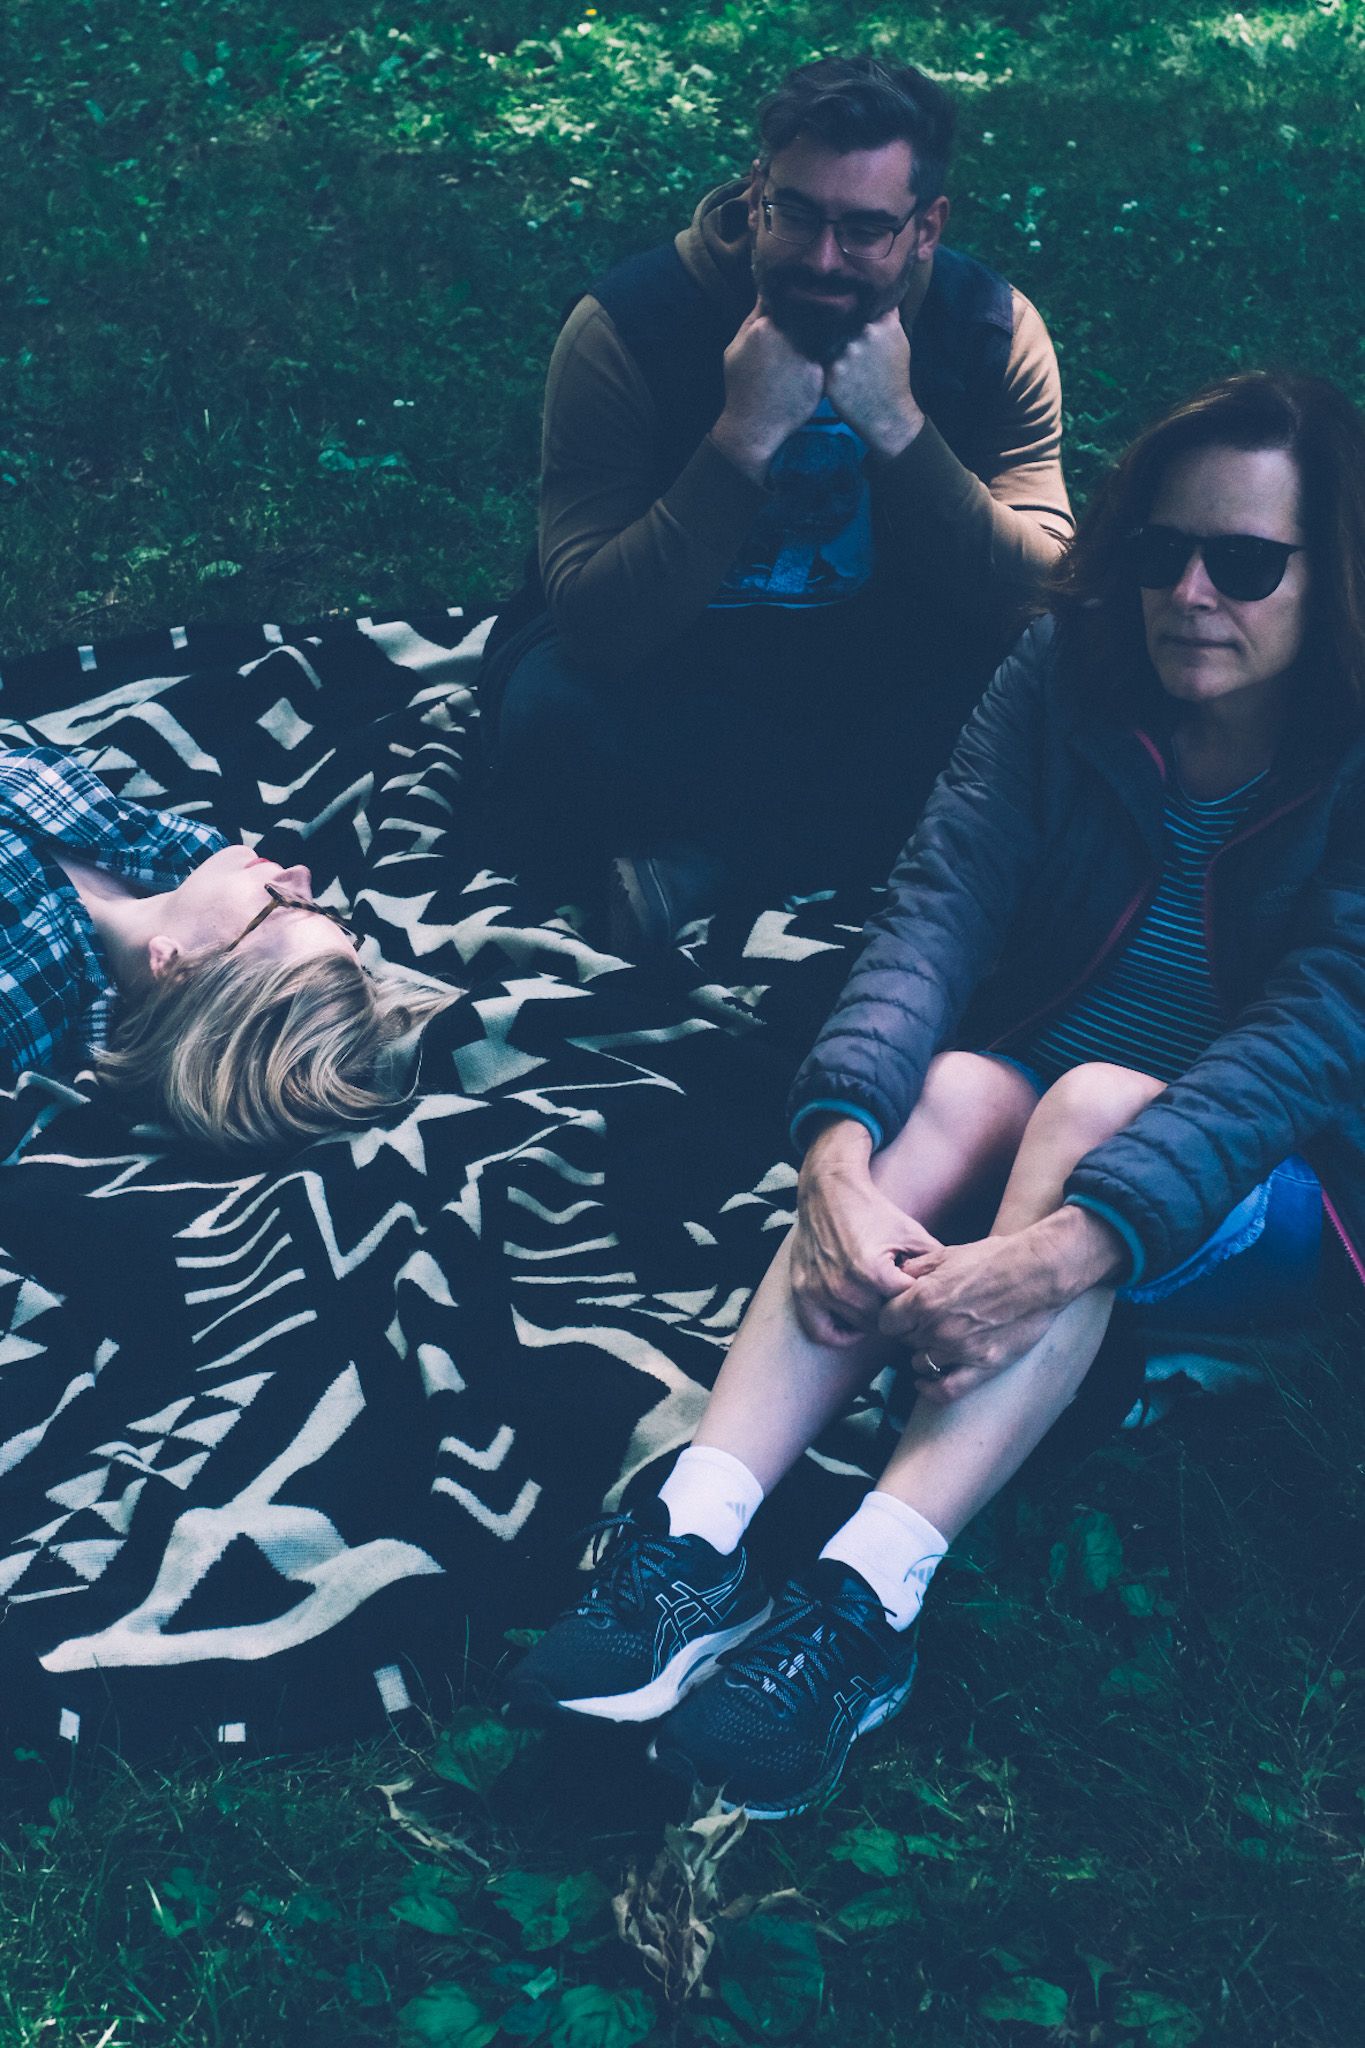 Three people sit on a black and white patterned blanket in the grass.